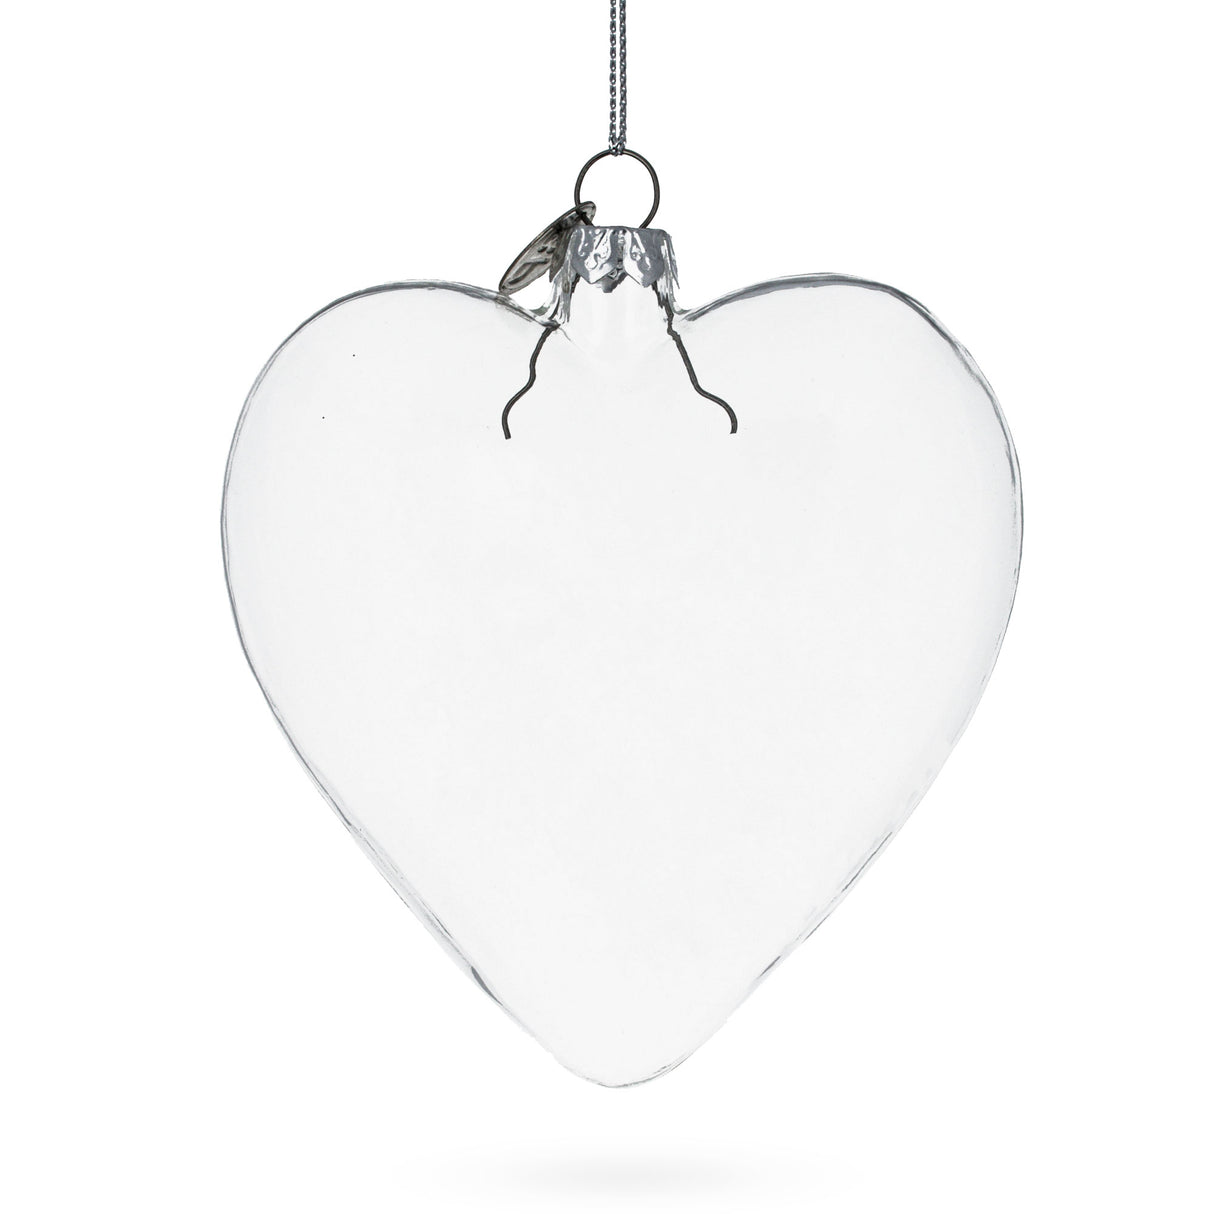 Heart Shape - Blown Clear Glass Christmas Ornament 4.1 Inches (105 mm) in Clear color, Heart shape